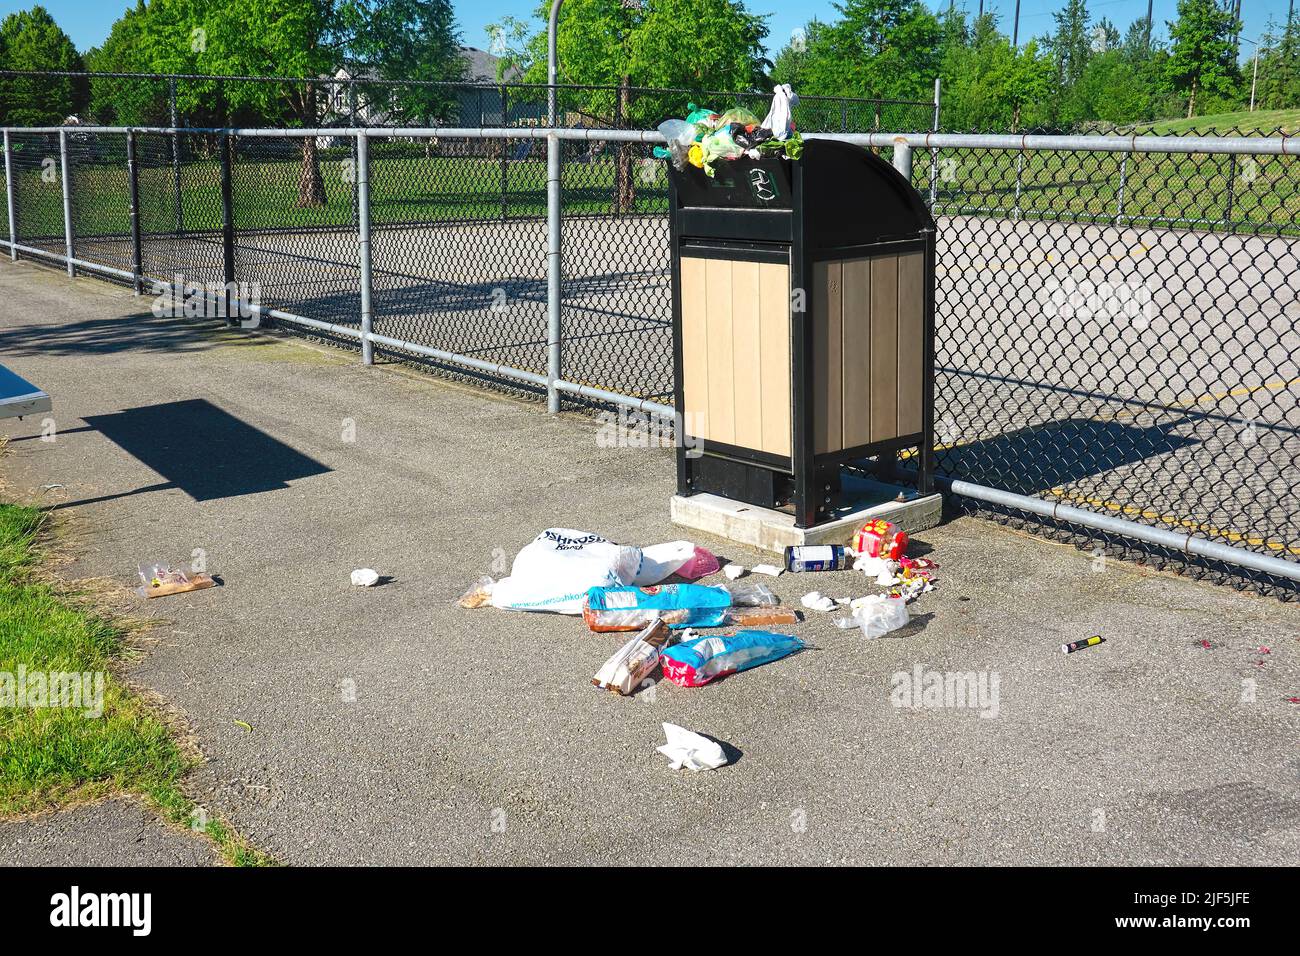 Trash bin overflowing with garbage beside a sport court in a local park. Stock Photo